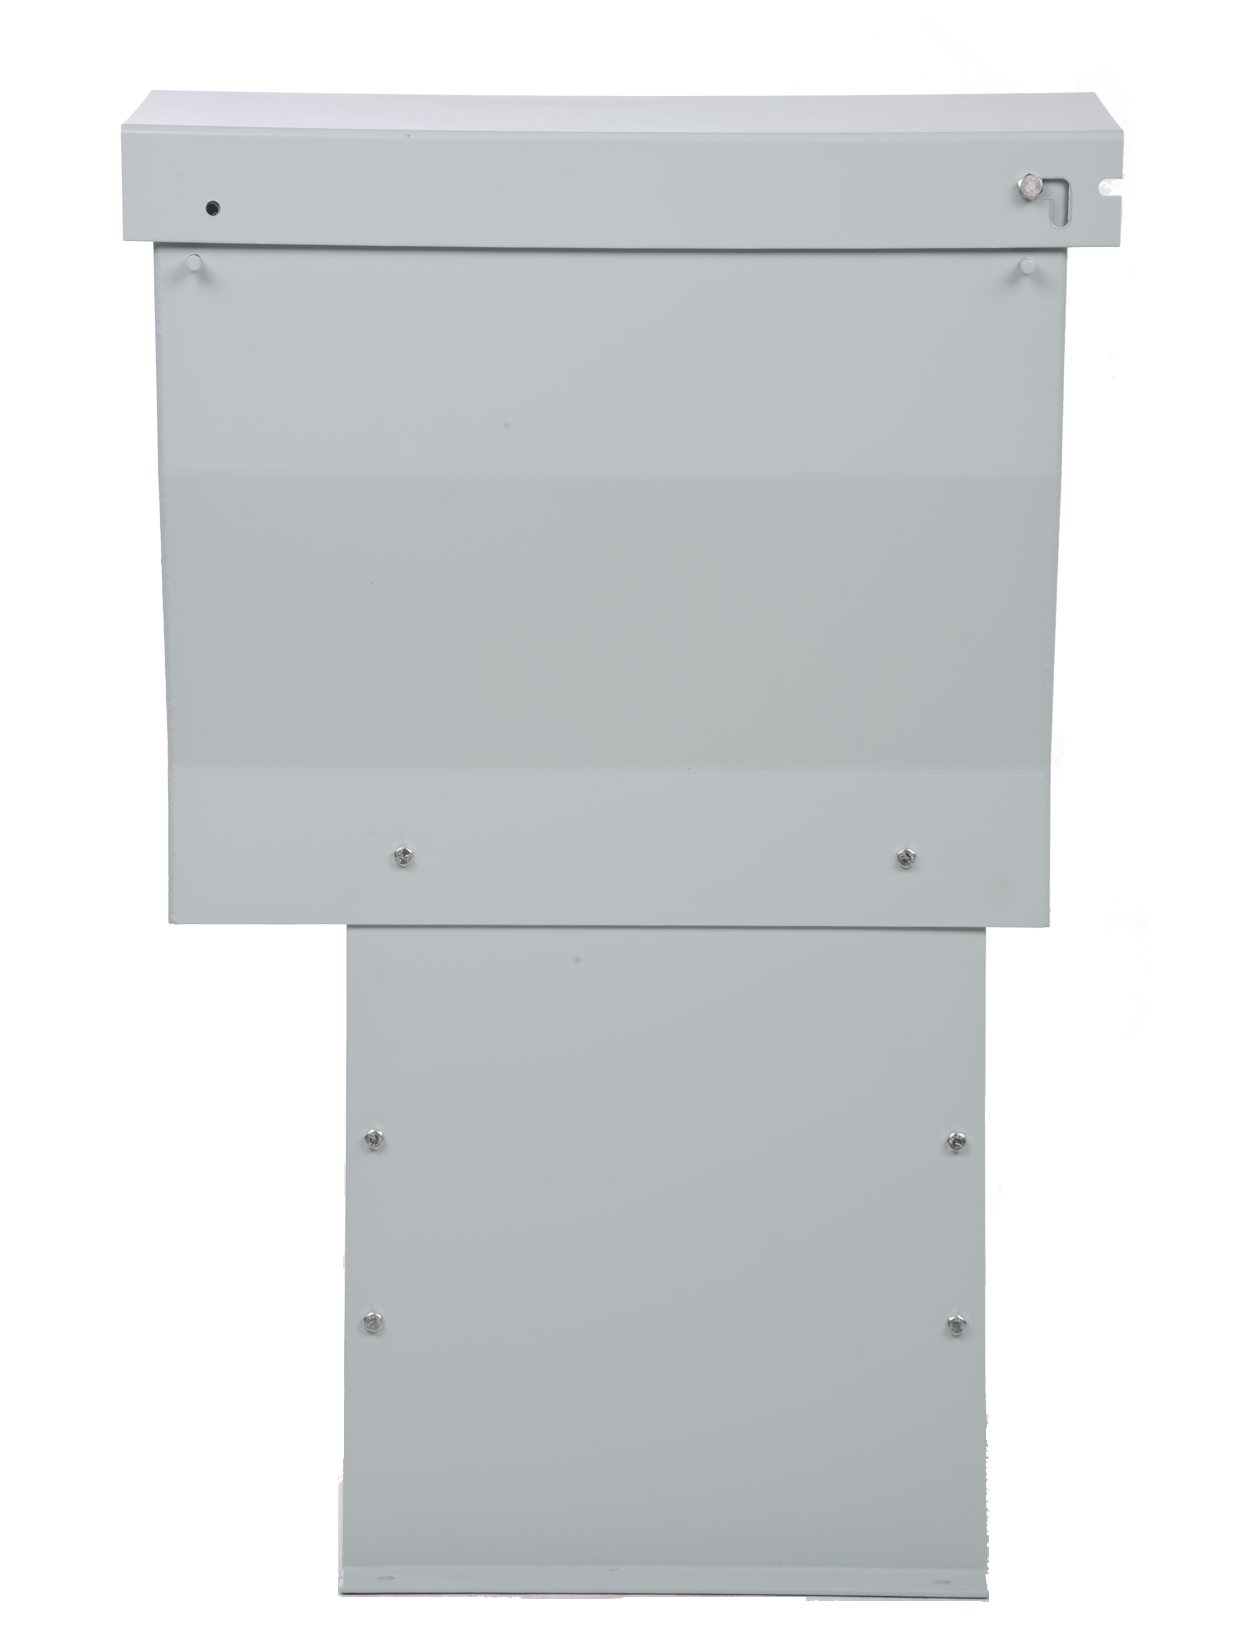 Side shot of Aluminum Weather Hood, an attractive and user-friendly weather hood and fan/motor support pedestal for outside applications.